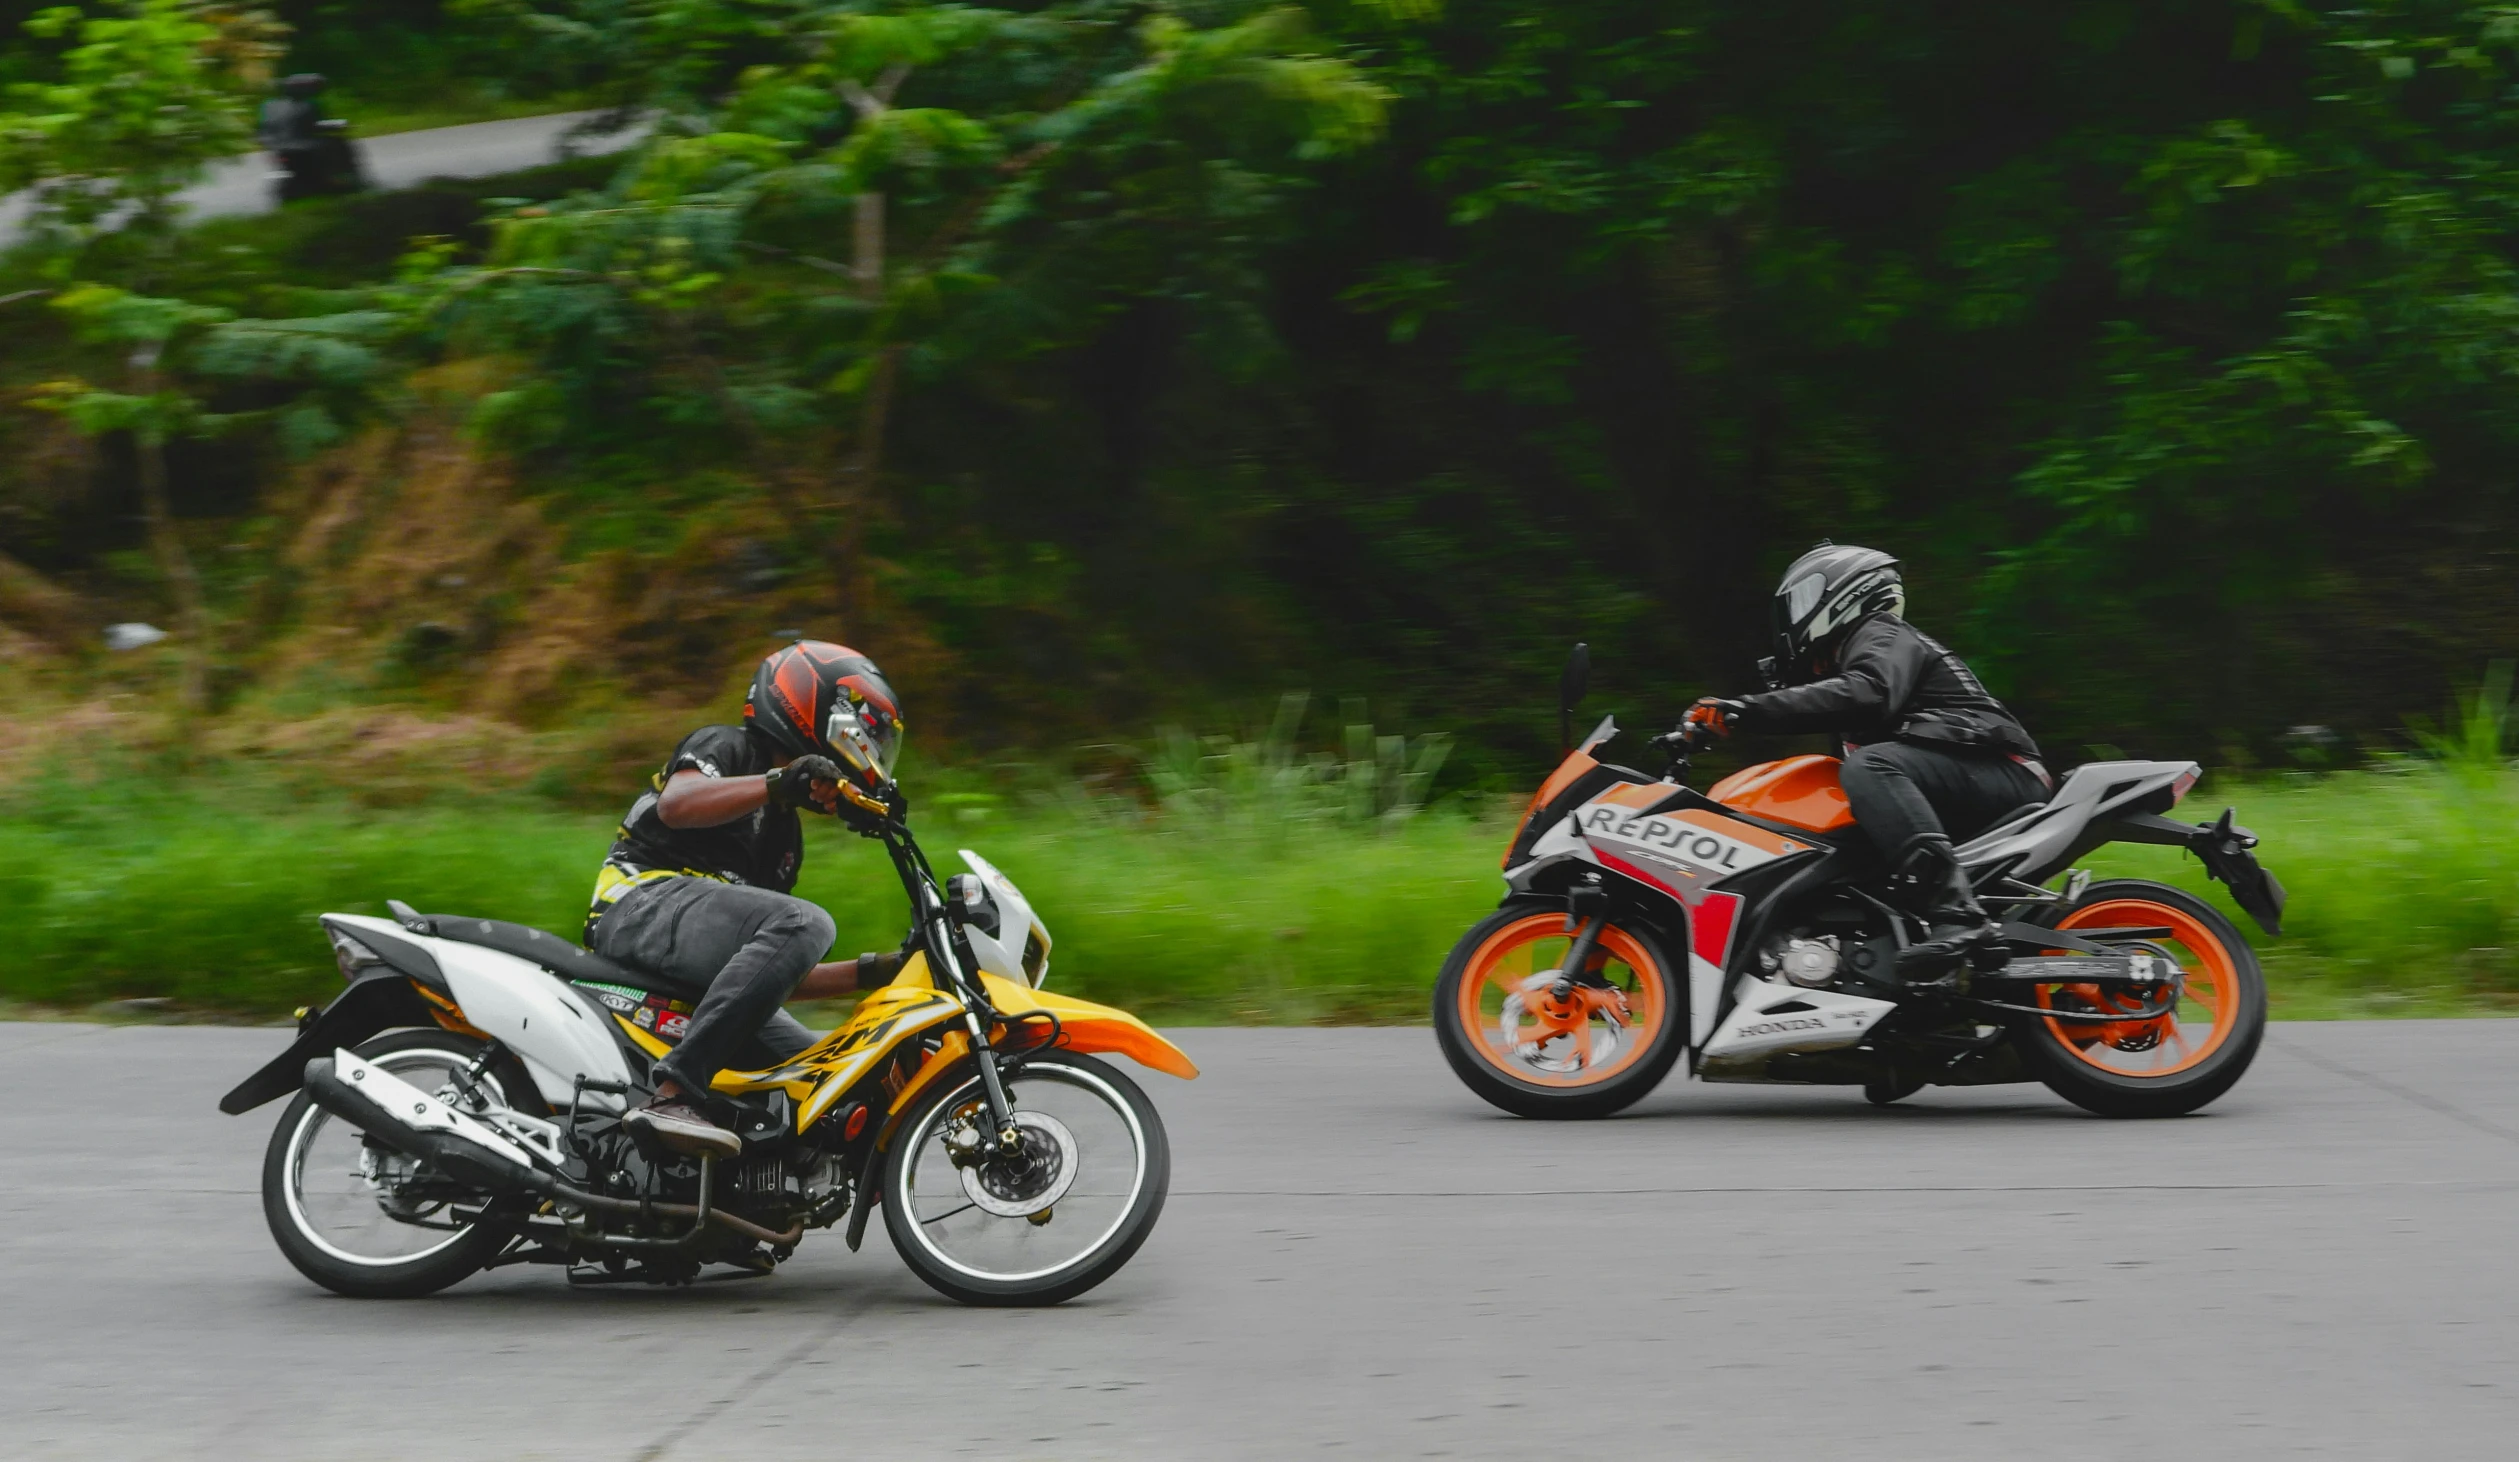 two men riding motorcycles down a winding road